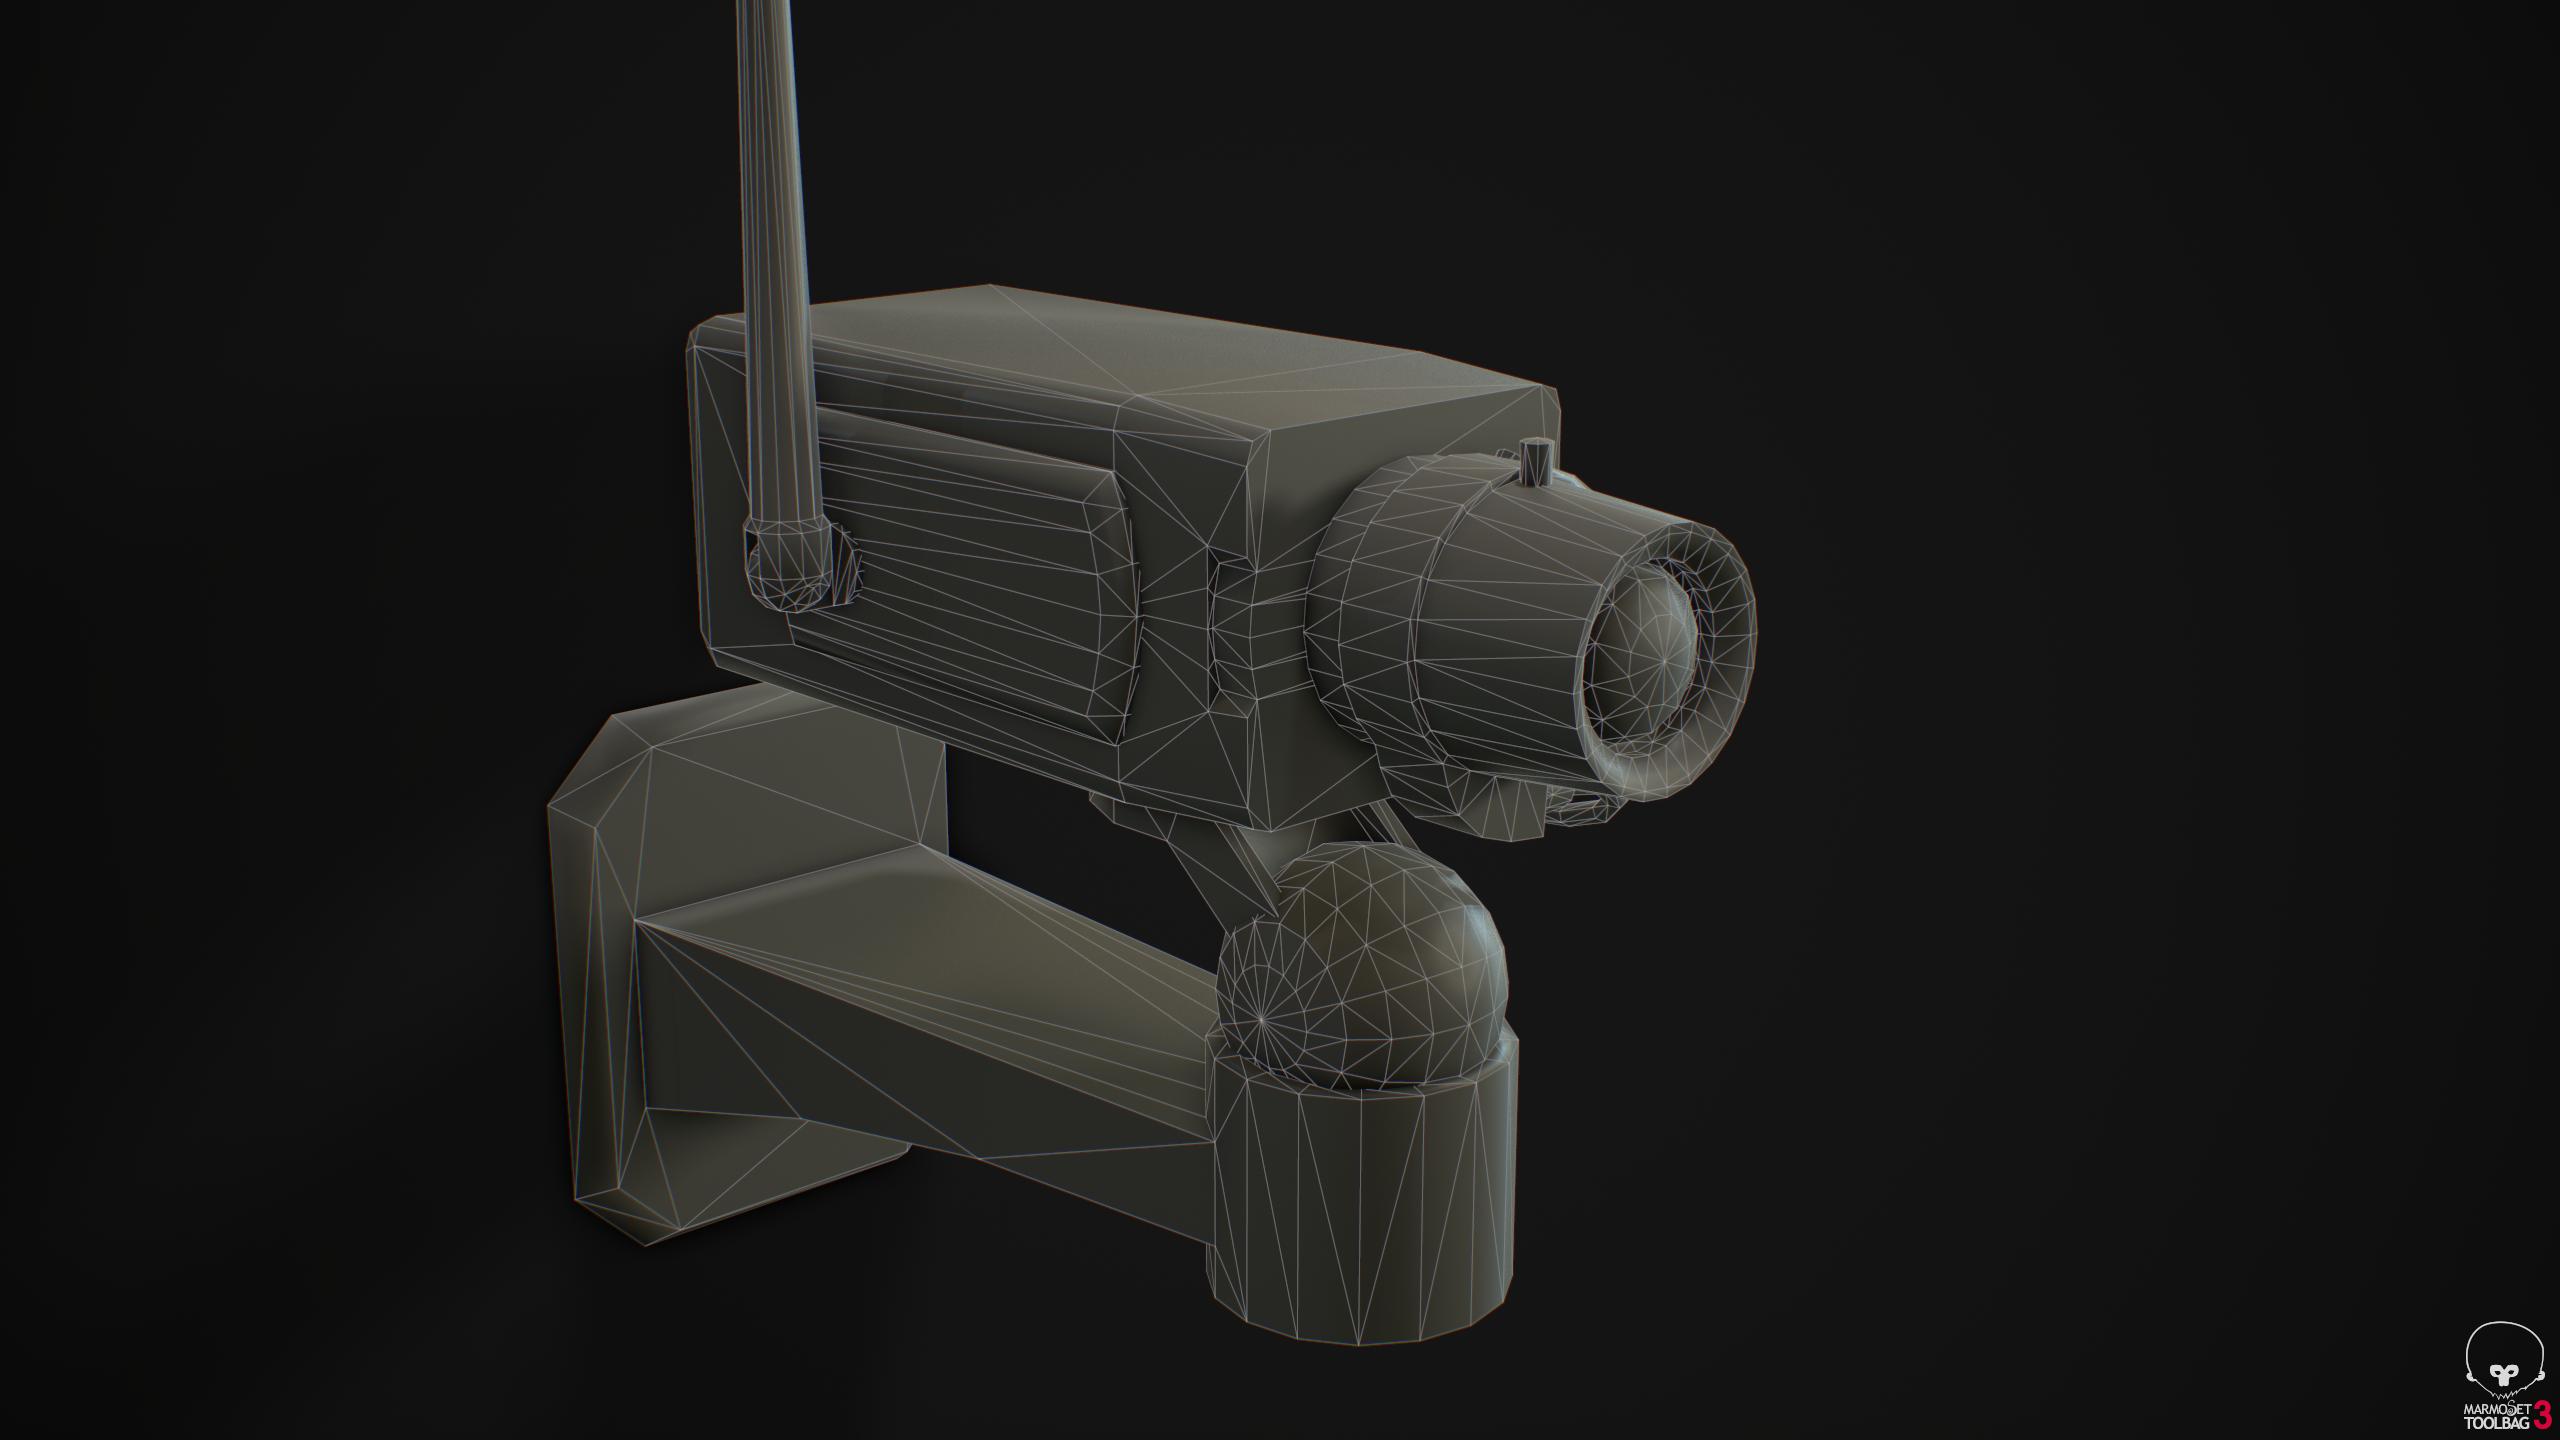 Wireframe render of a small security camera